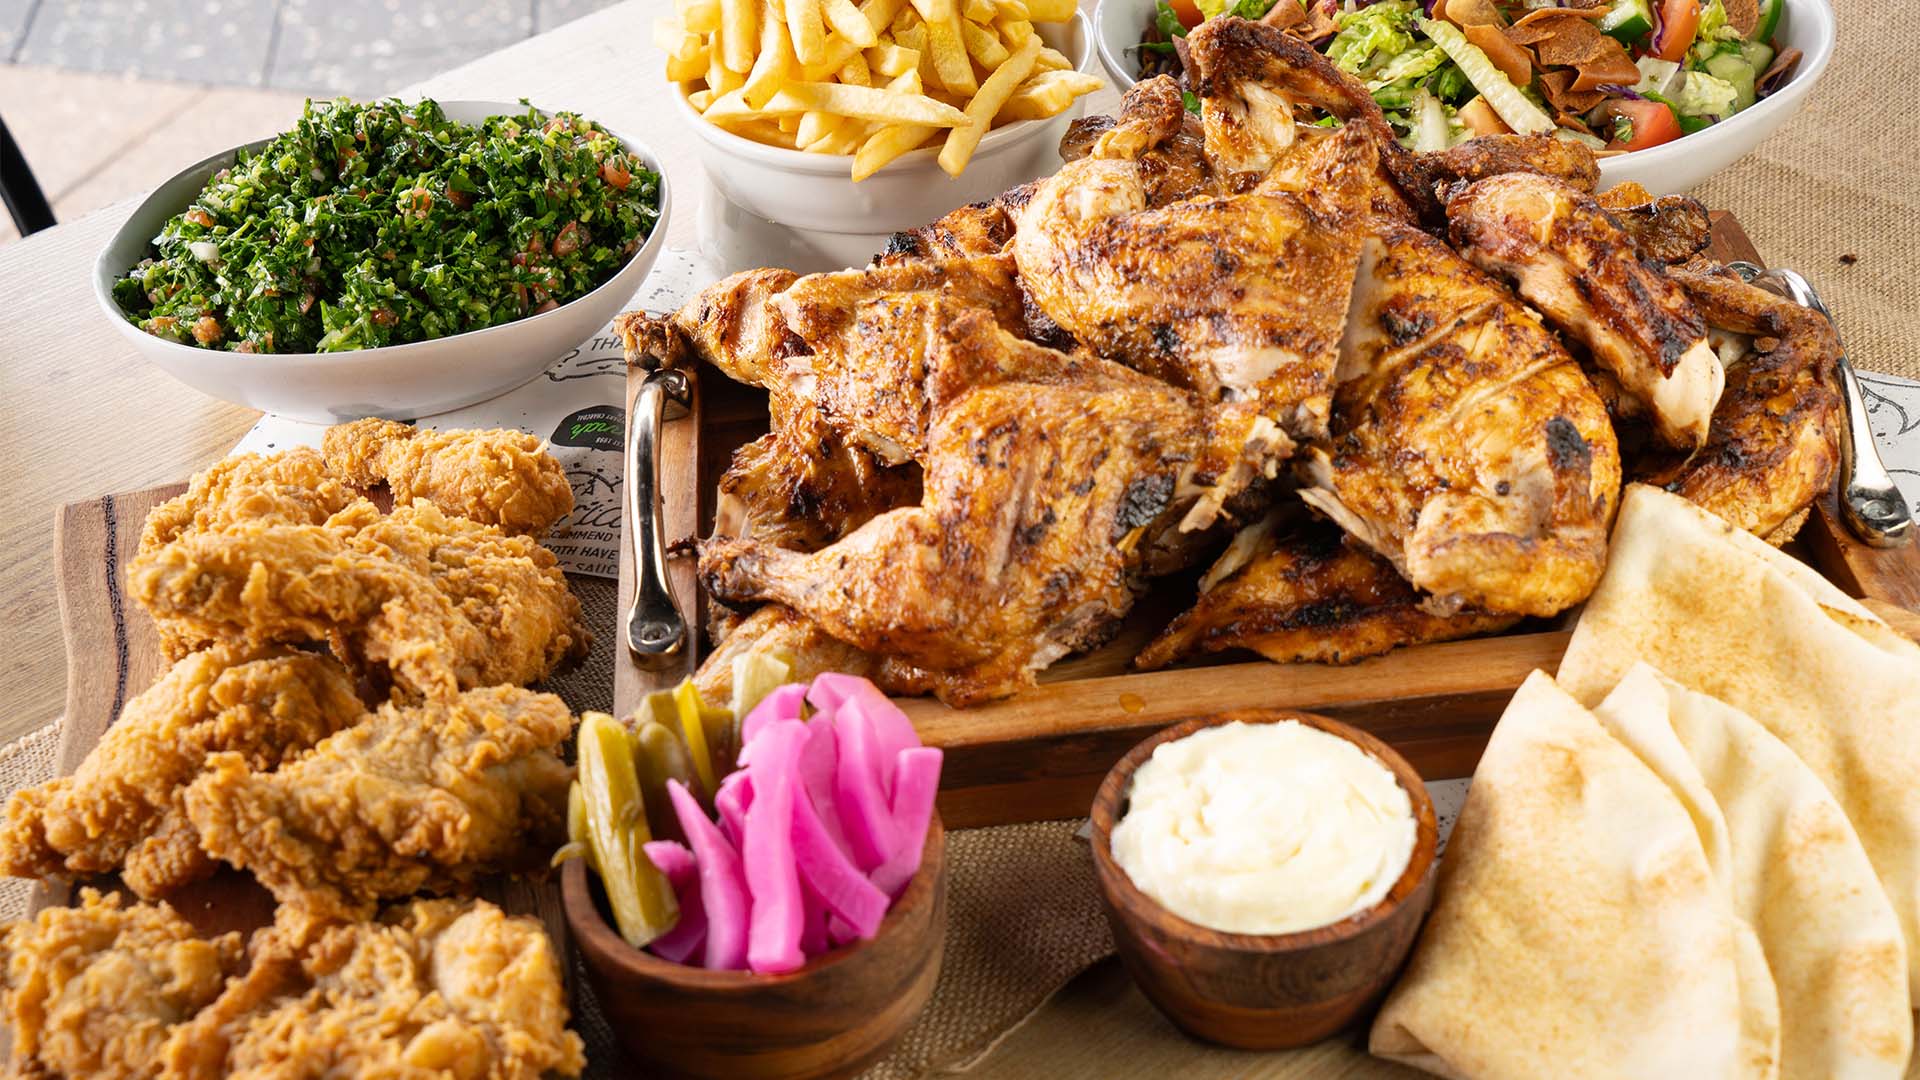 Cult-Favourite Charcoal Chicken Shop El Jannah Is Opening Its First North Shore Outpost